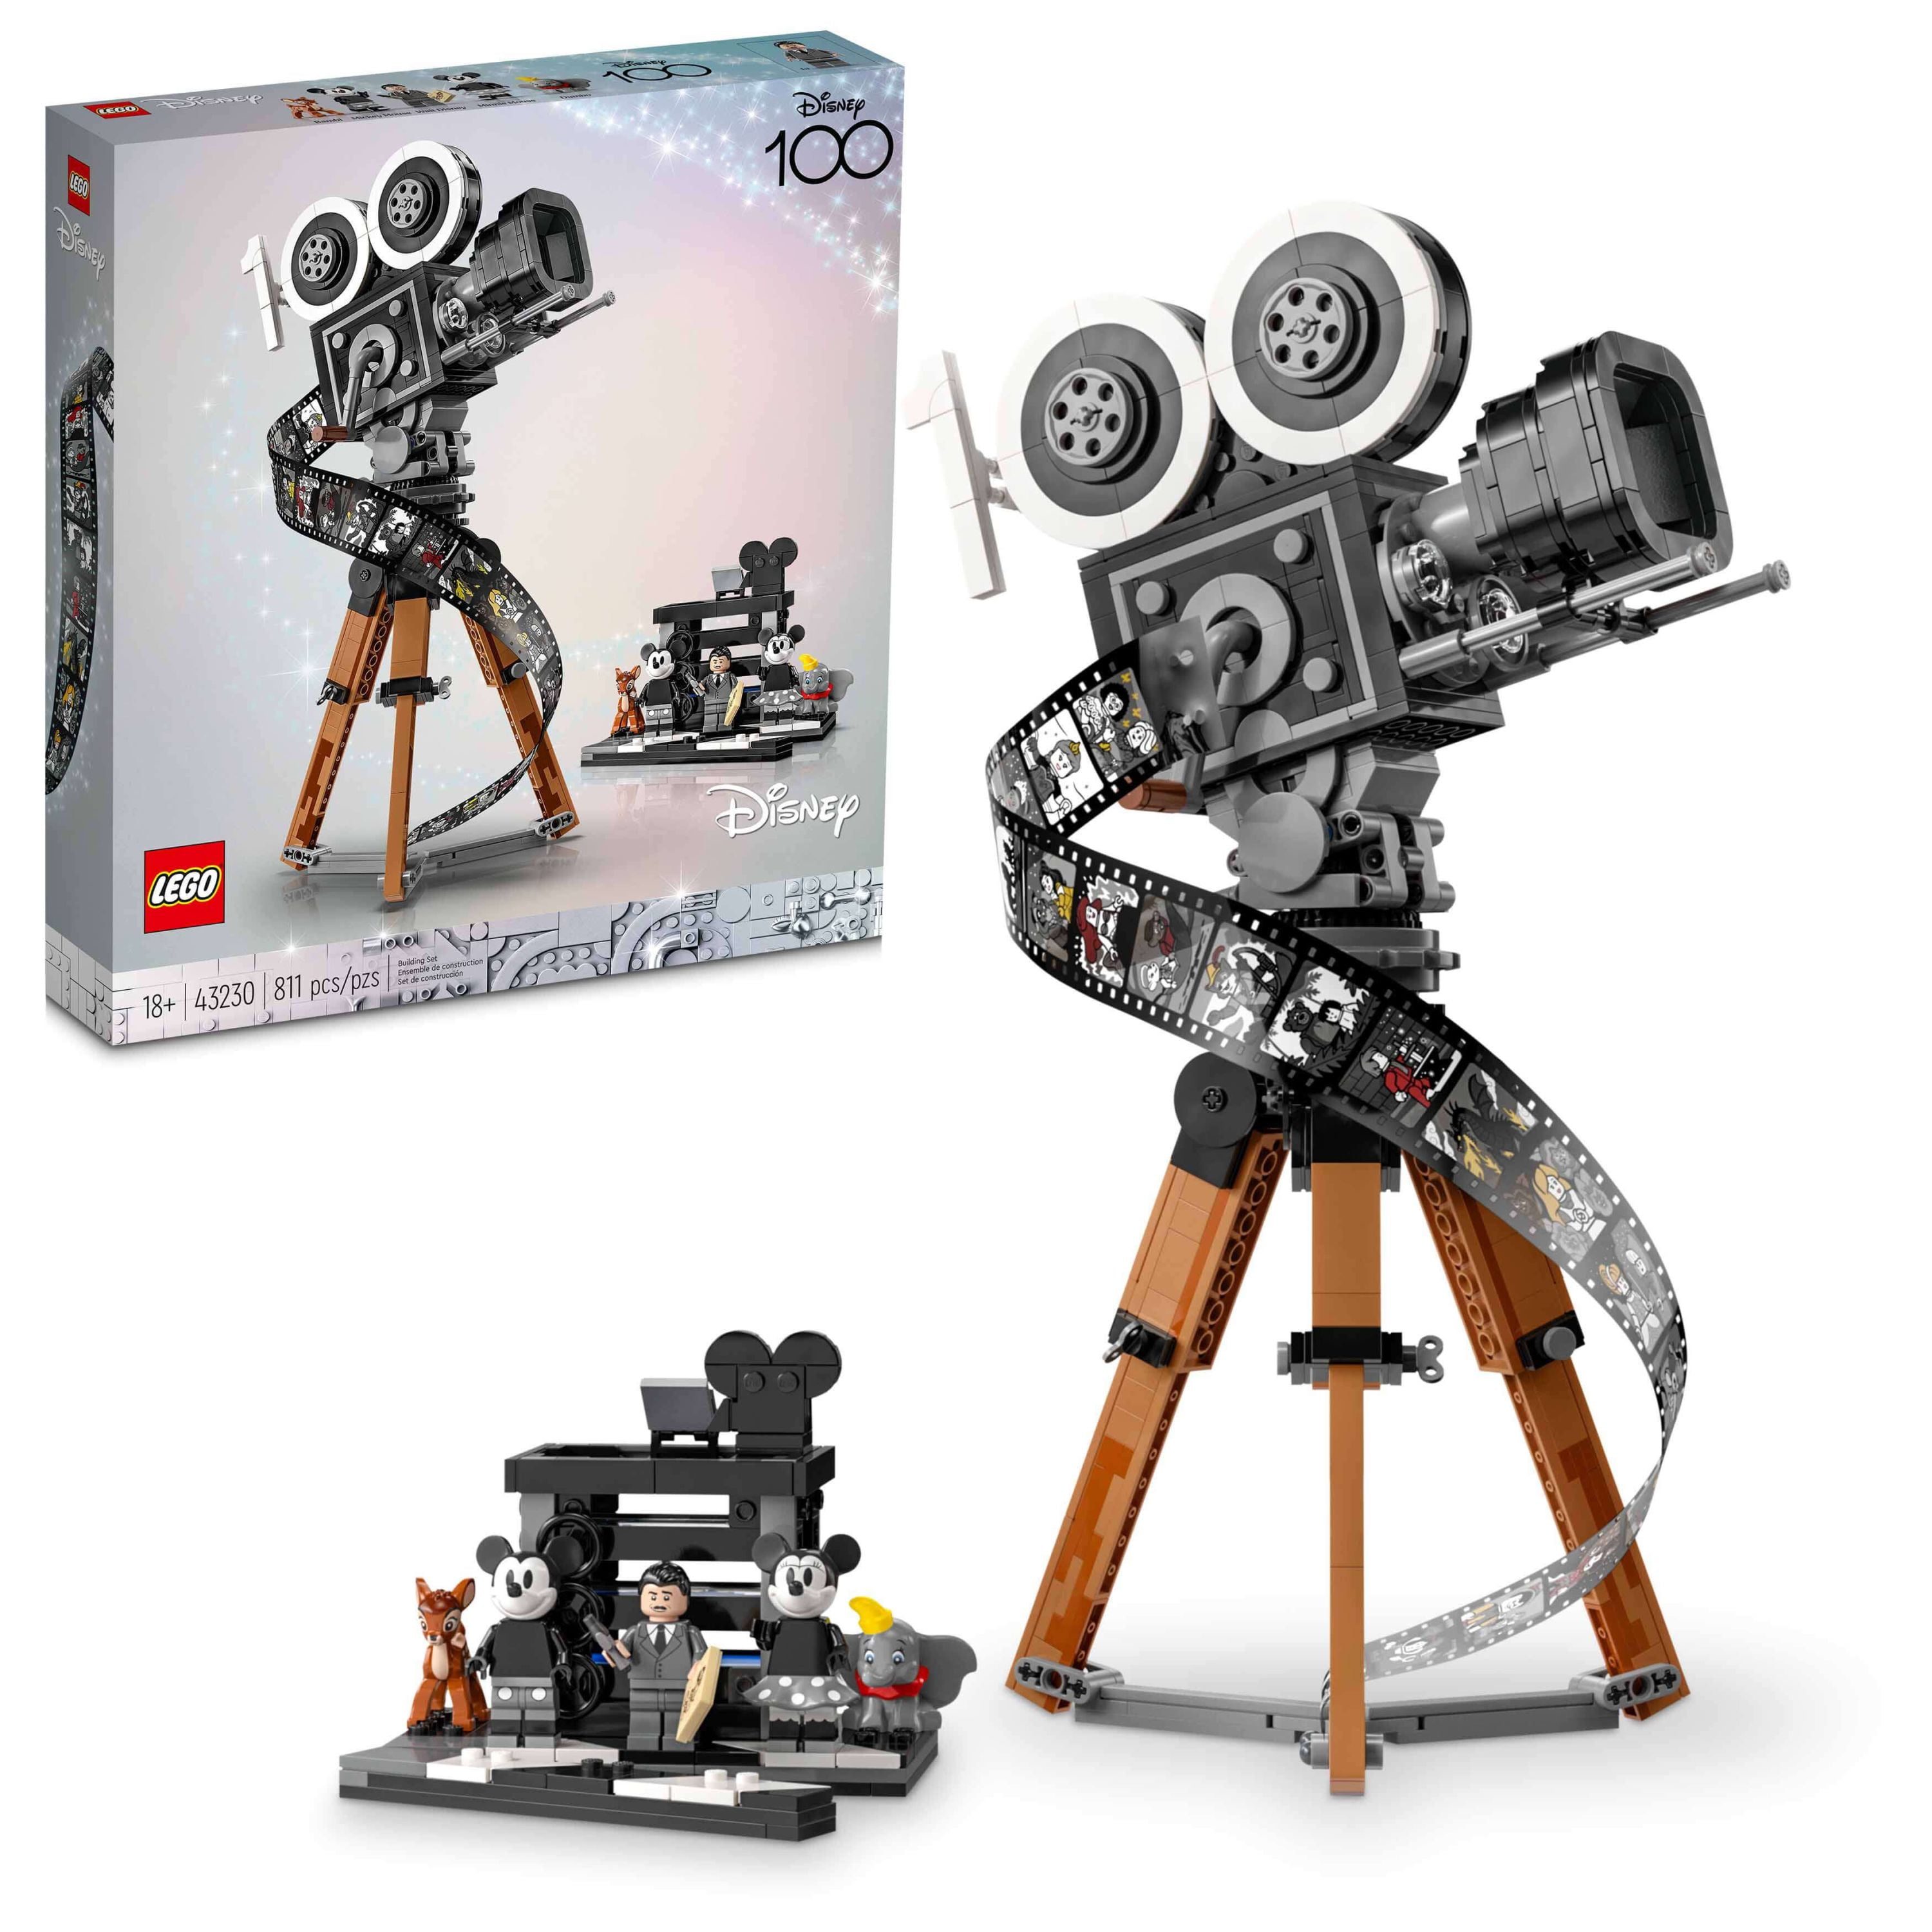 LEGO Disney Walt Disney Tribute Camera 43230 Disney Fan Building Set,  Celebrate Disney 100 with a Collectible Piece Perfect for Play and Display